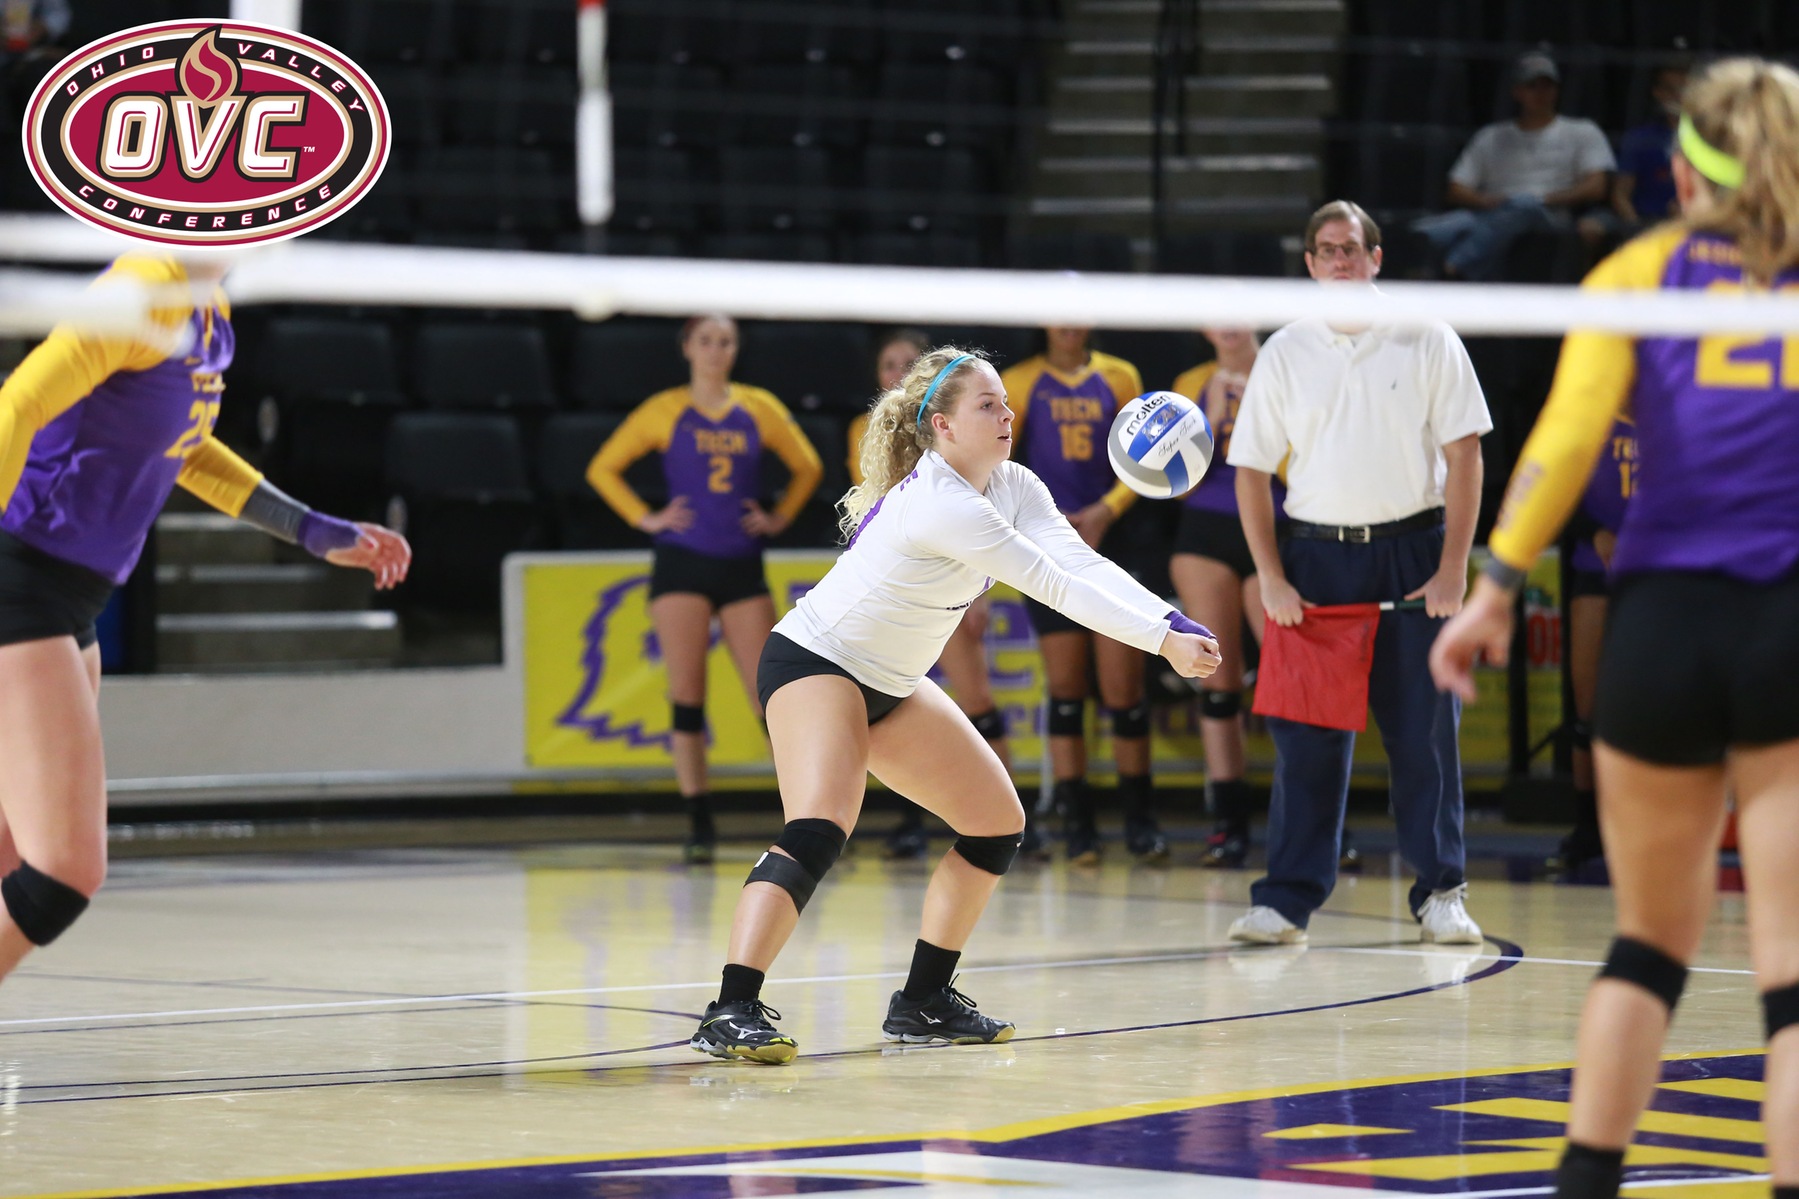 Libero Brugere voted to All-OVC second team